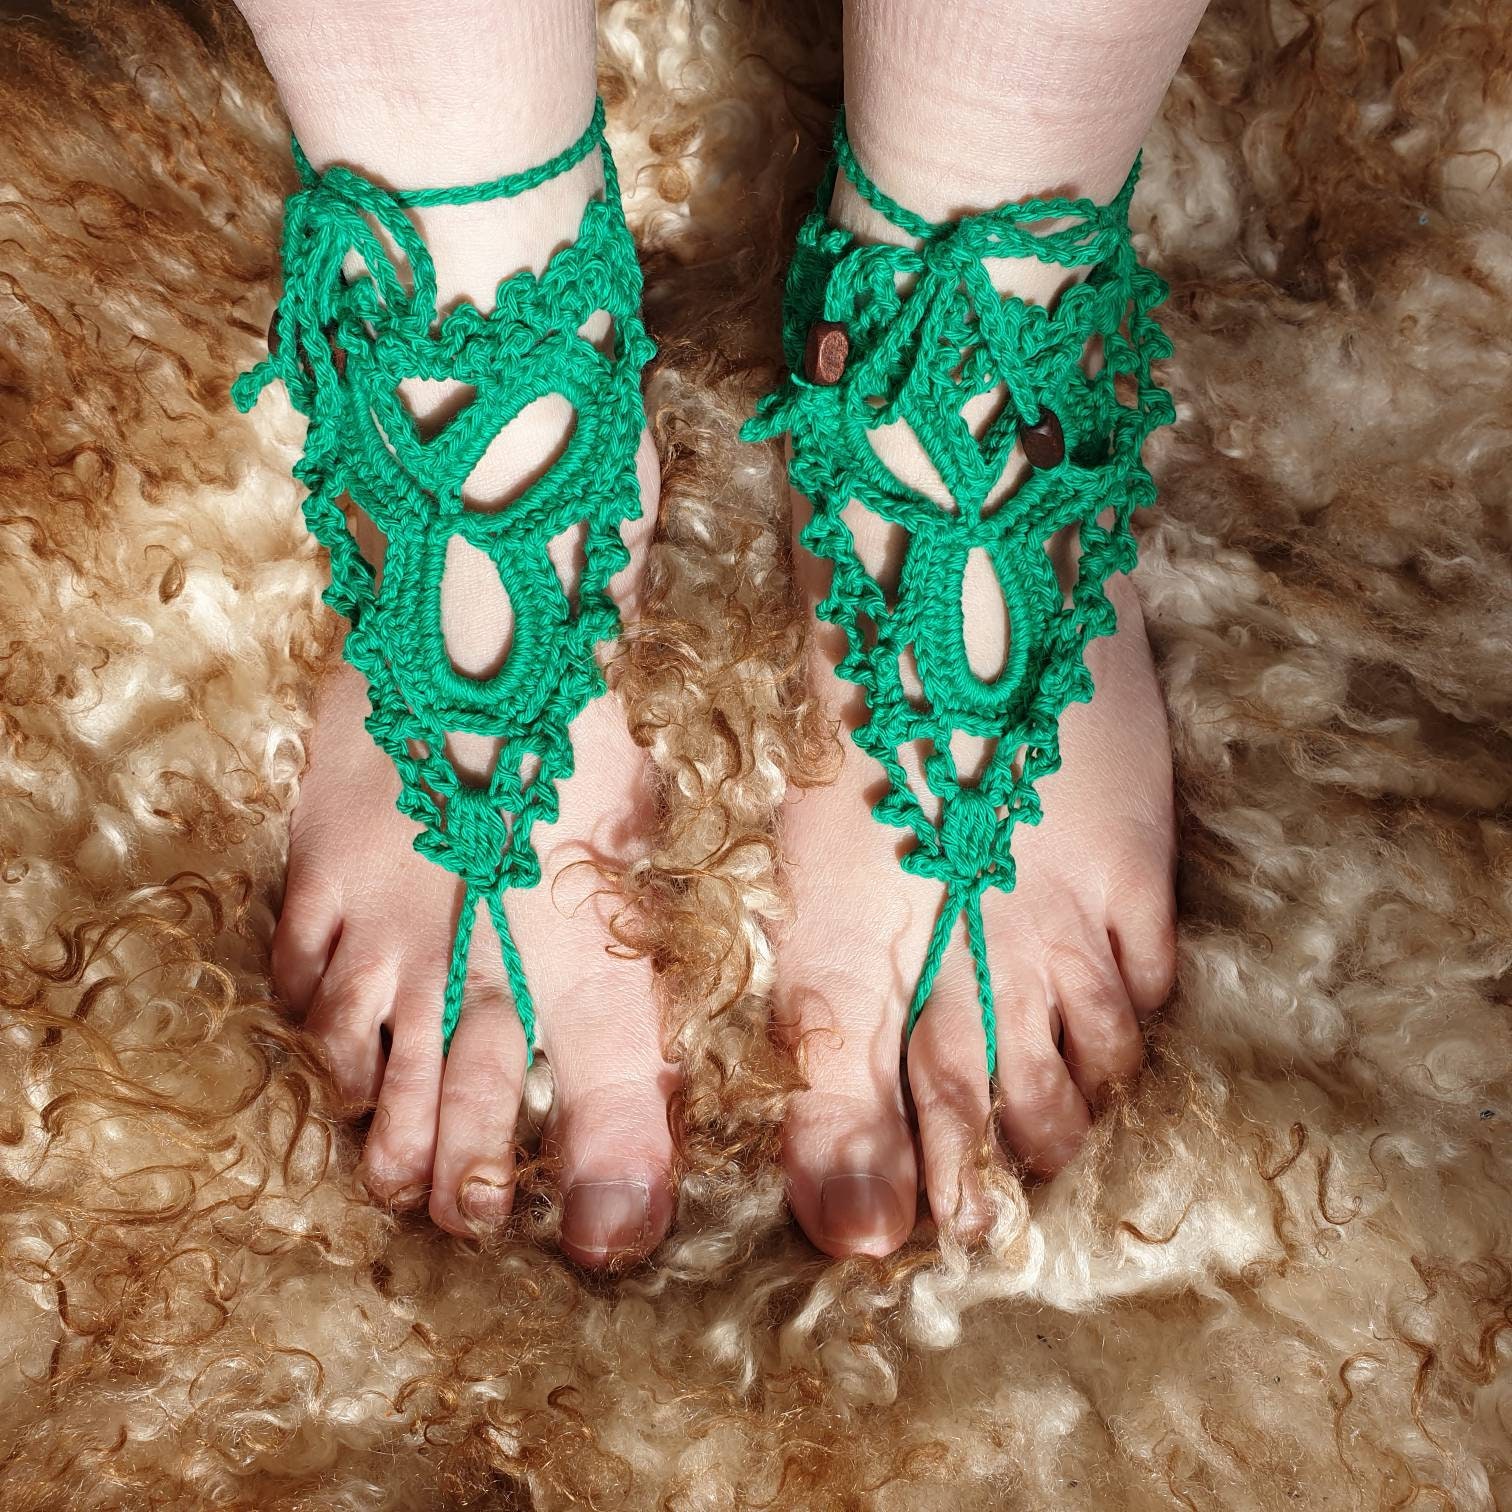 Crochet Baby Barefoot Sandals Baby Foot Accessories Photo - Etsy